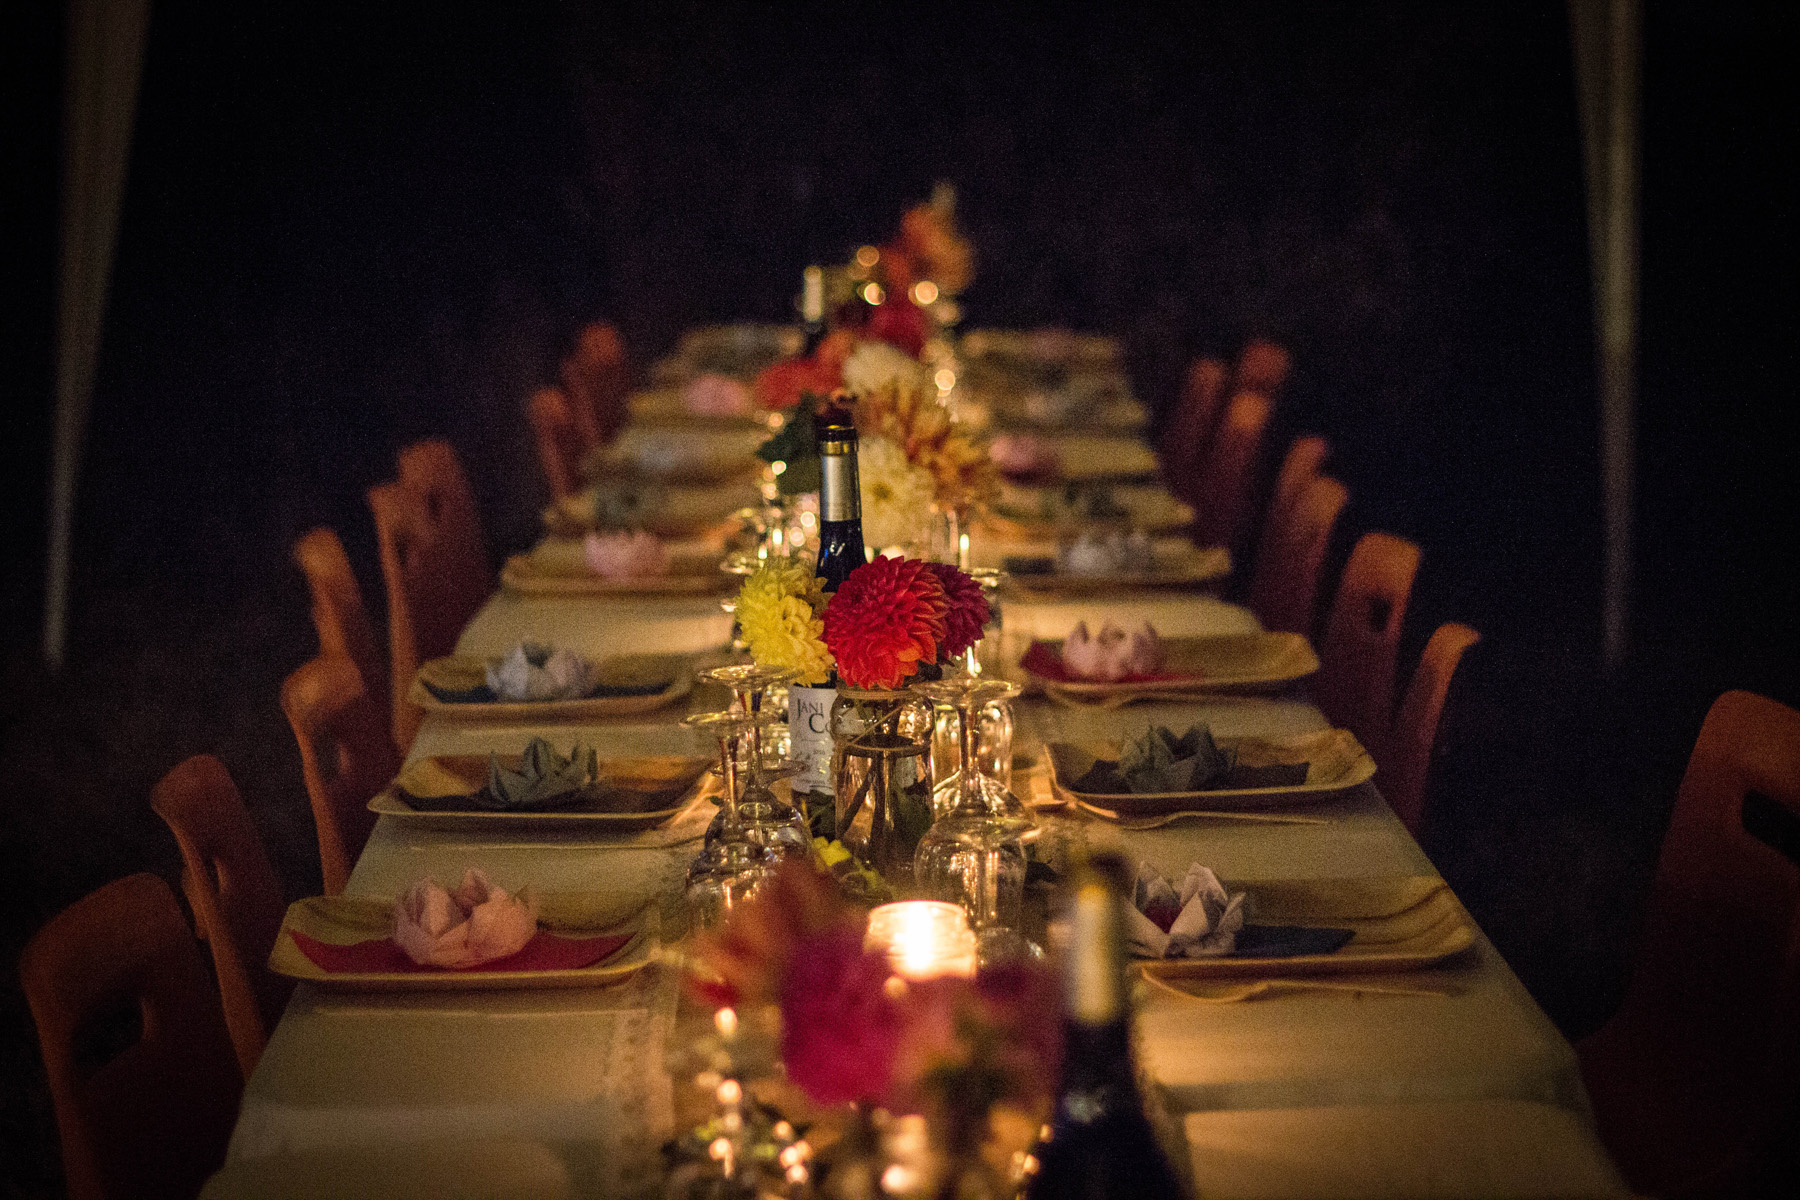 A beautifully set long wooden table with plates of food, ready for a rehearsal dinner party.